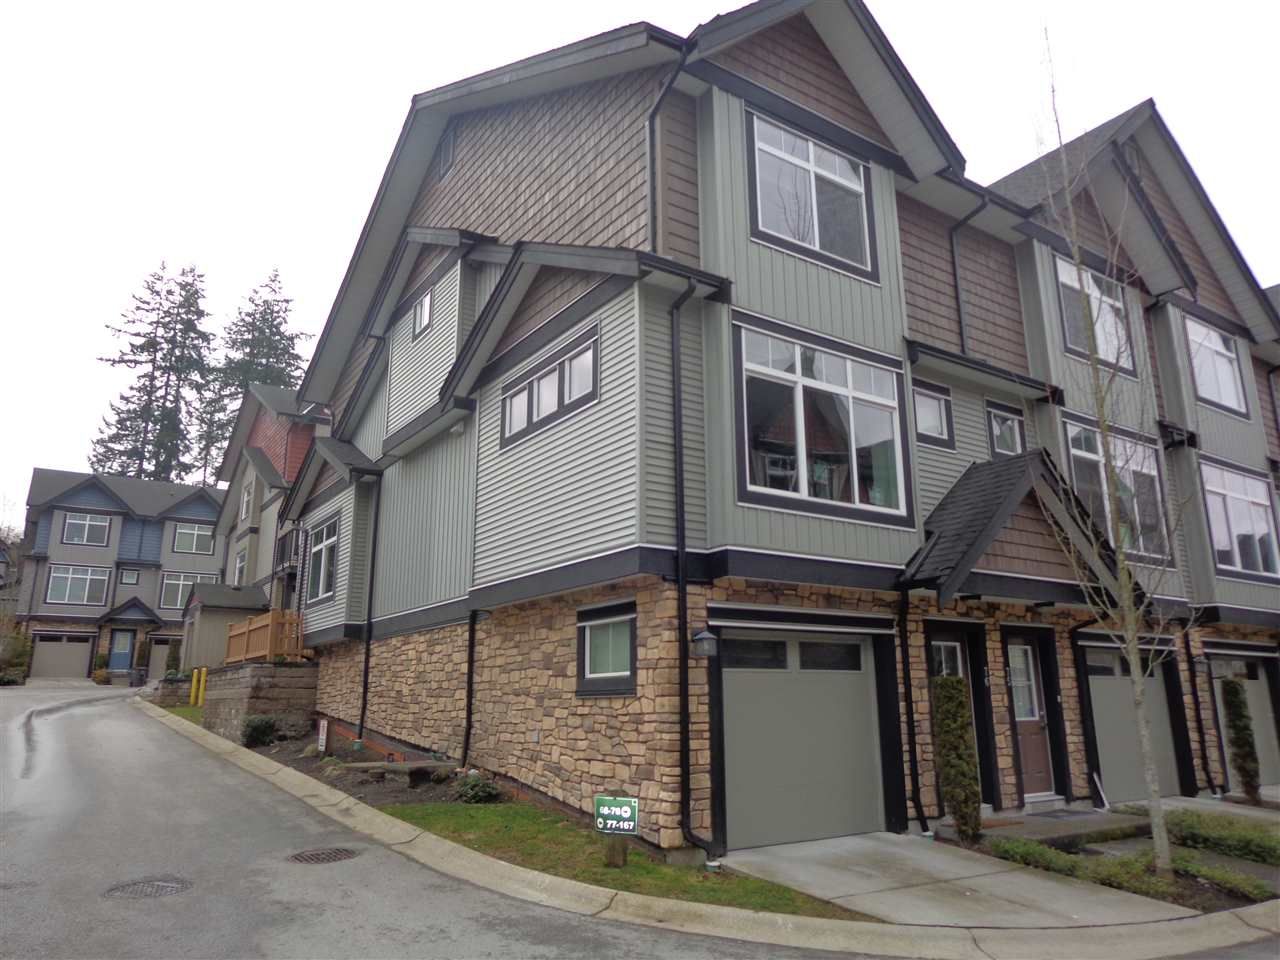 Main Photo: 76 6299 144 STREET in Surrey: Sullivan Station Townhouse for sale : MLS®# R2141156